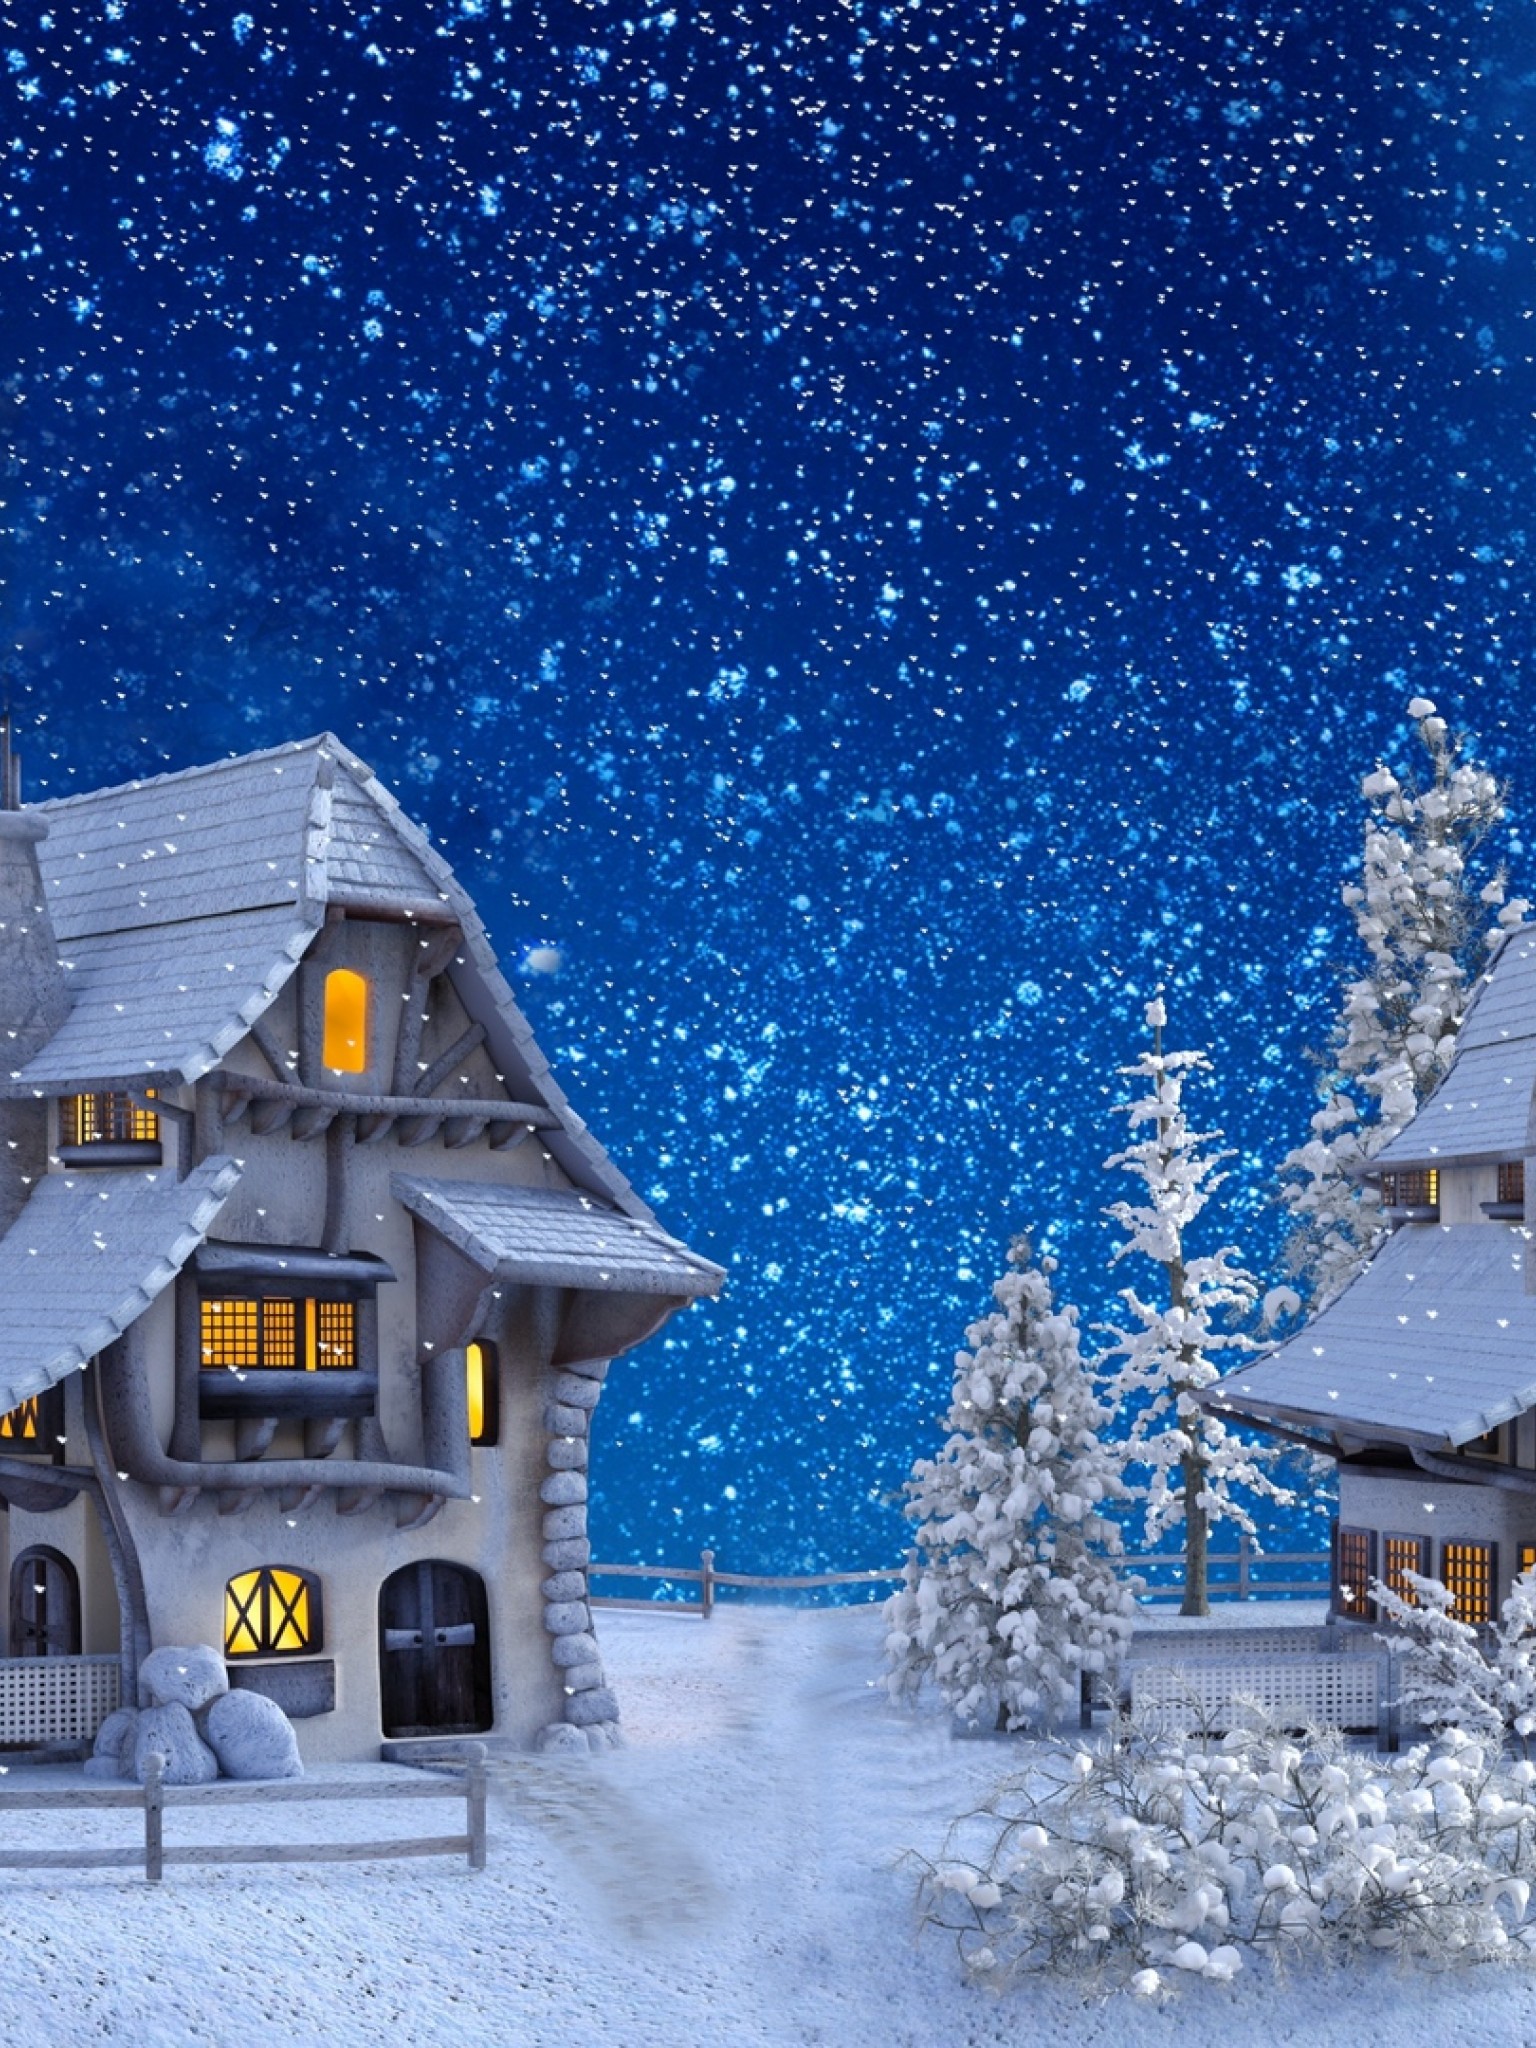 Houses covered in snow painting HD Wallpaper